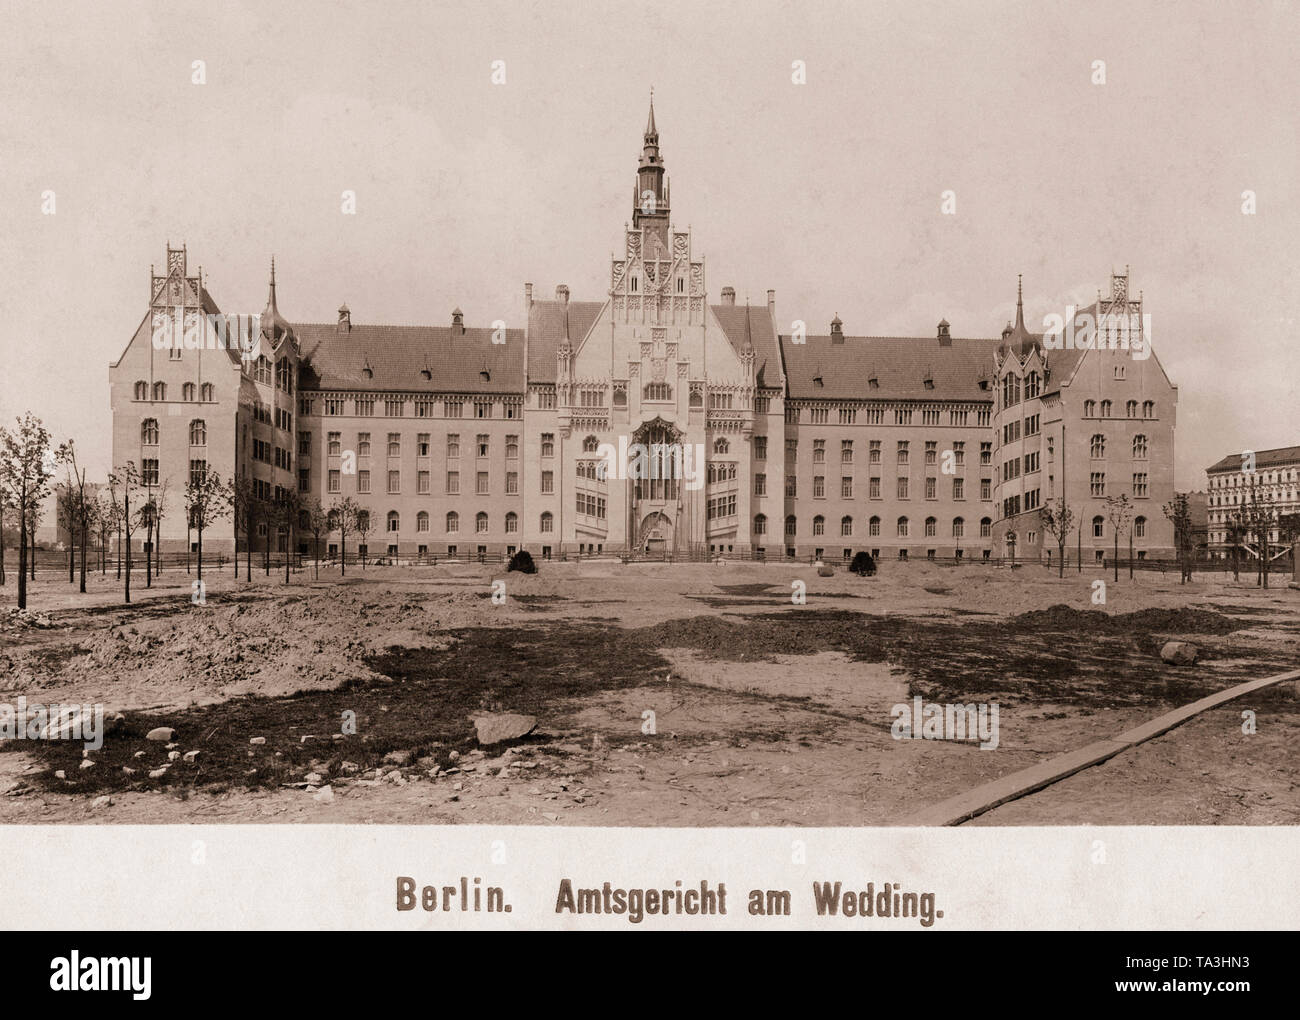 View of the Amtsgericht Wedding (city courthouse) in Berlin. Stock Photo